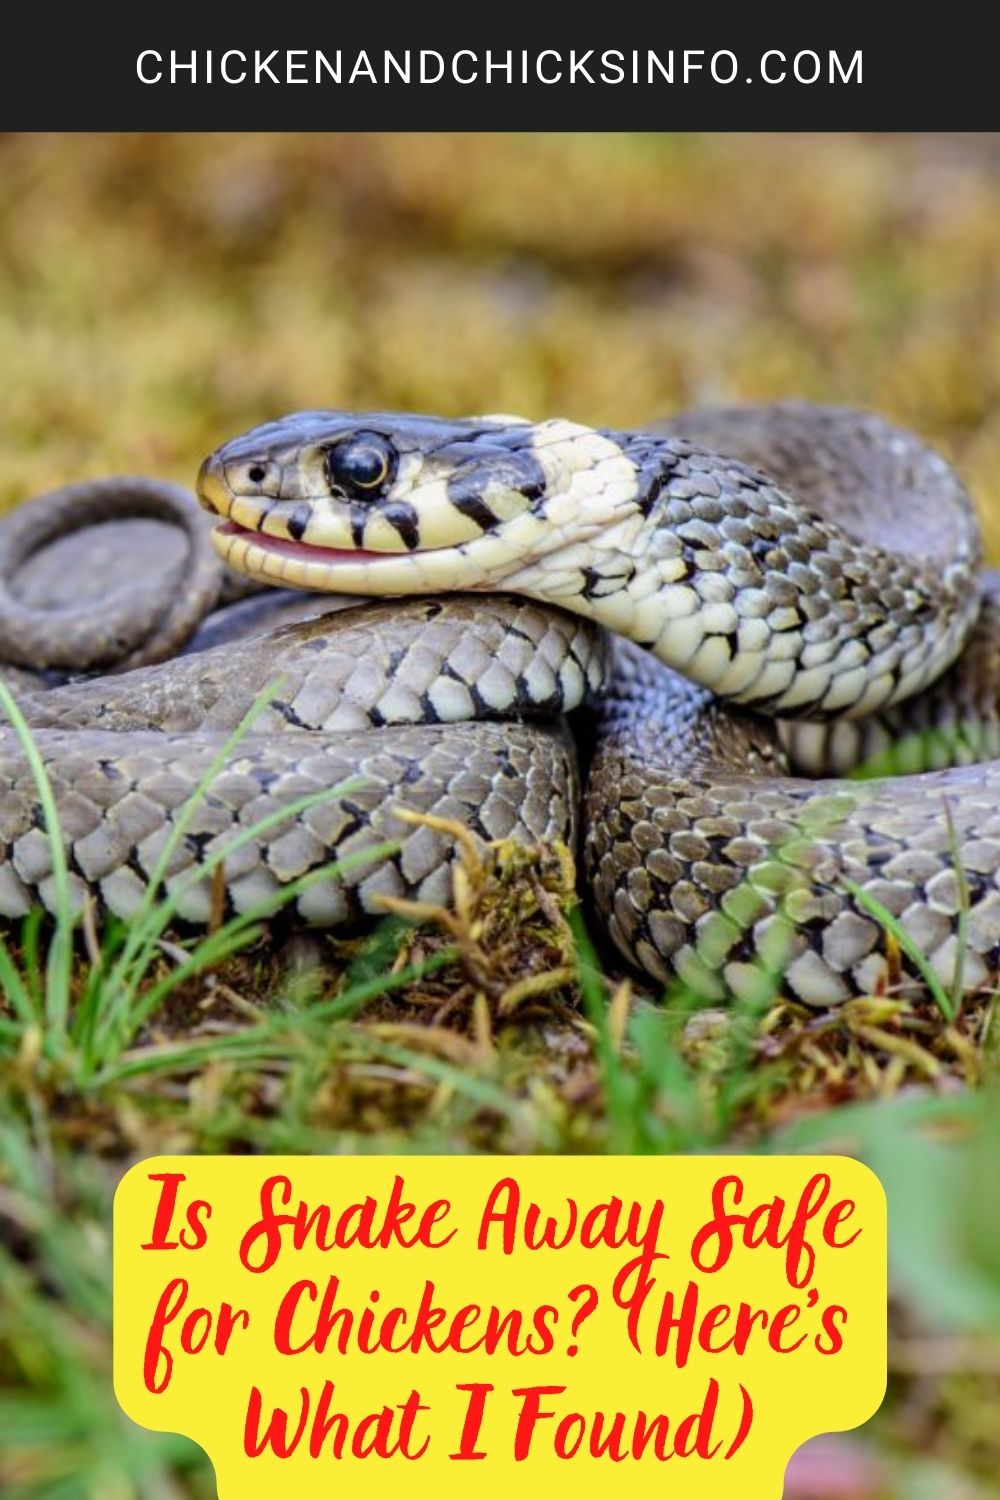 Is Snake Away Safe for Chickens? (Here’s What I Found) poster.
